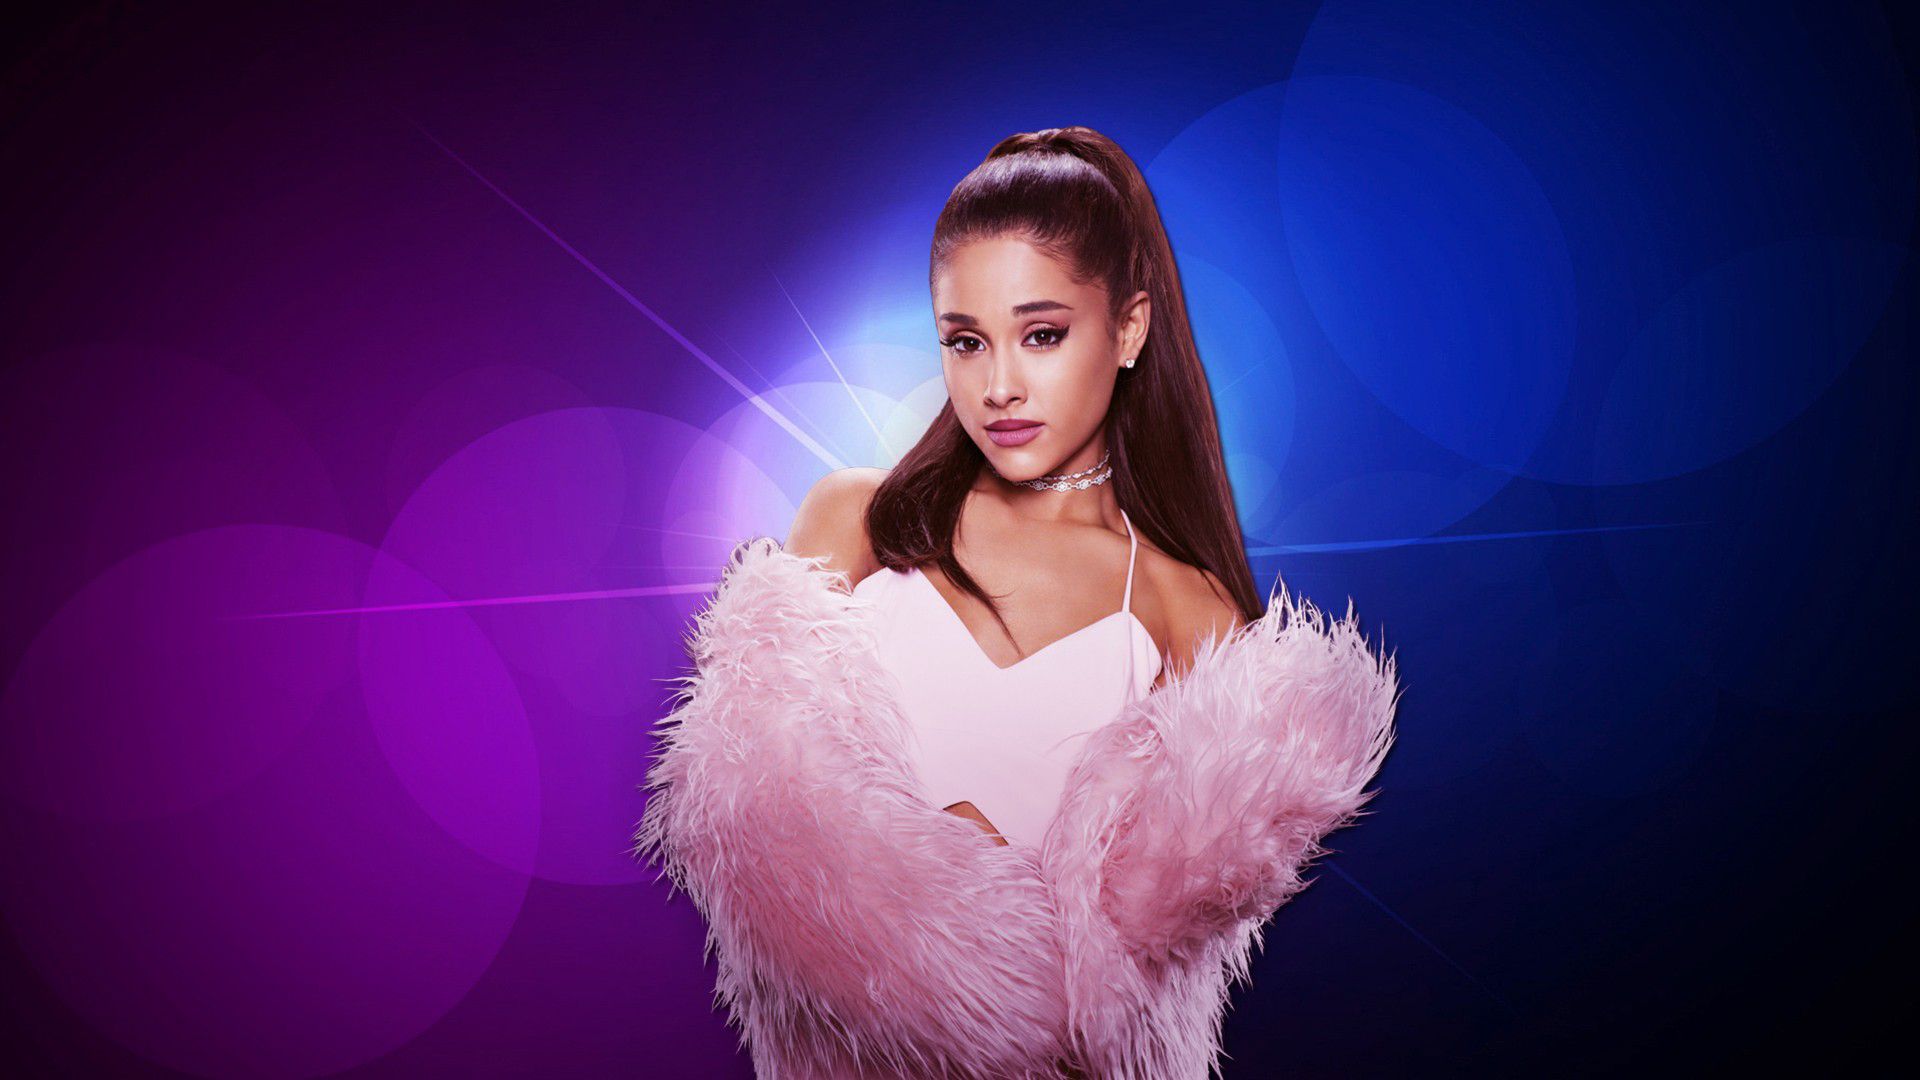 Ariana Grande 1920x1080 Wallpaper & Background Beautiful Best Available For Download Ariana Grande 1920x1080 Photo Free On Zicxa.com Image